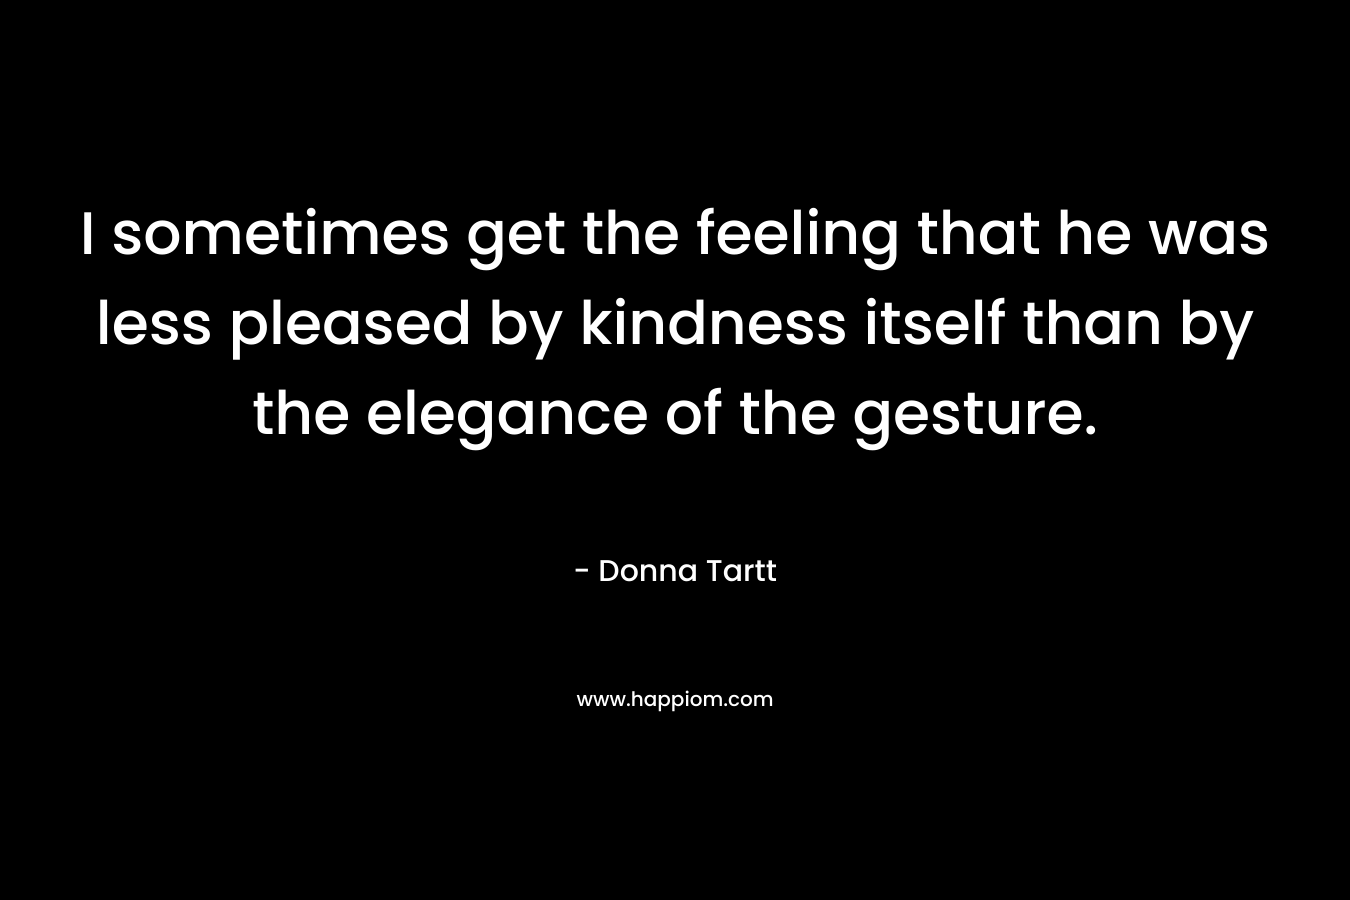 I sometimes get the feeling that he was less pleased by kindness itself than by the elegance of the gesture. – Donna Tartt